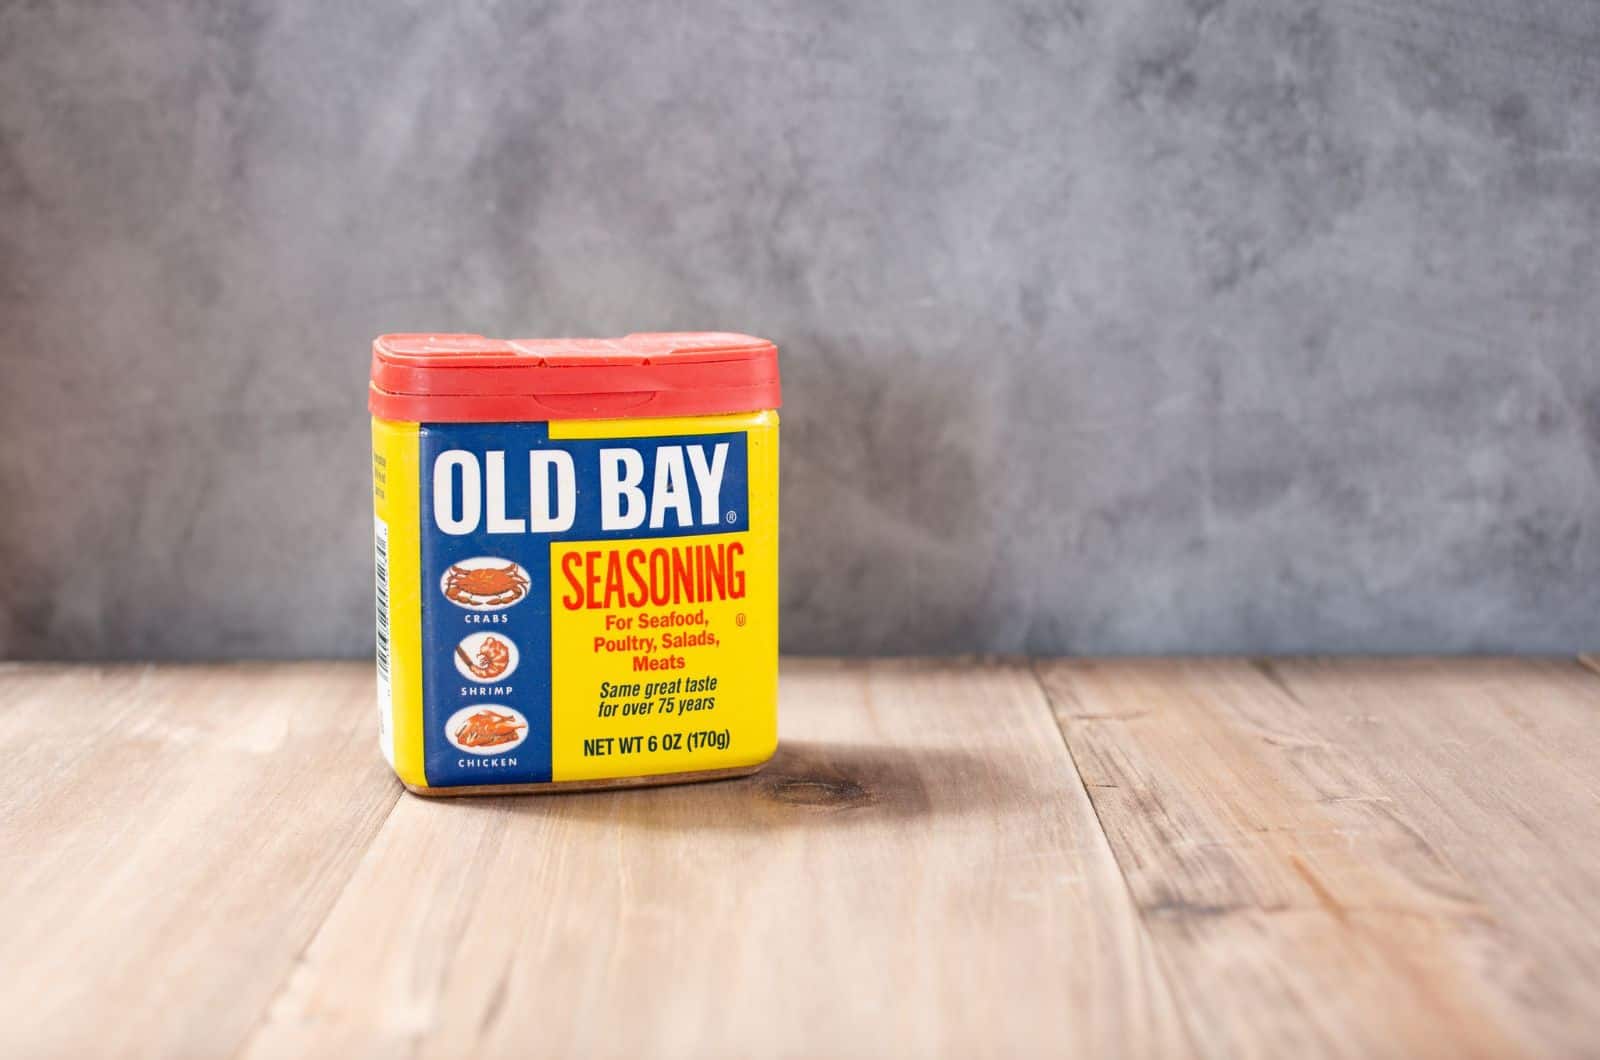 Old Bay seasoning on the table